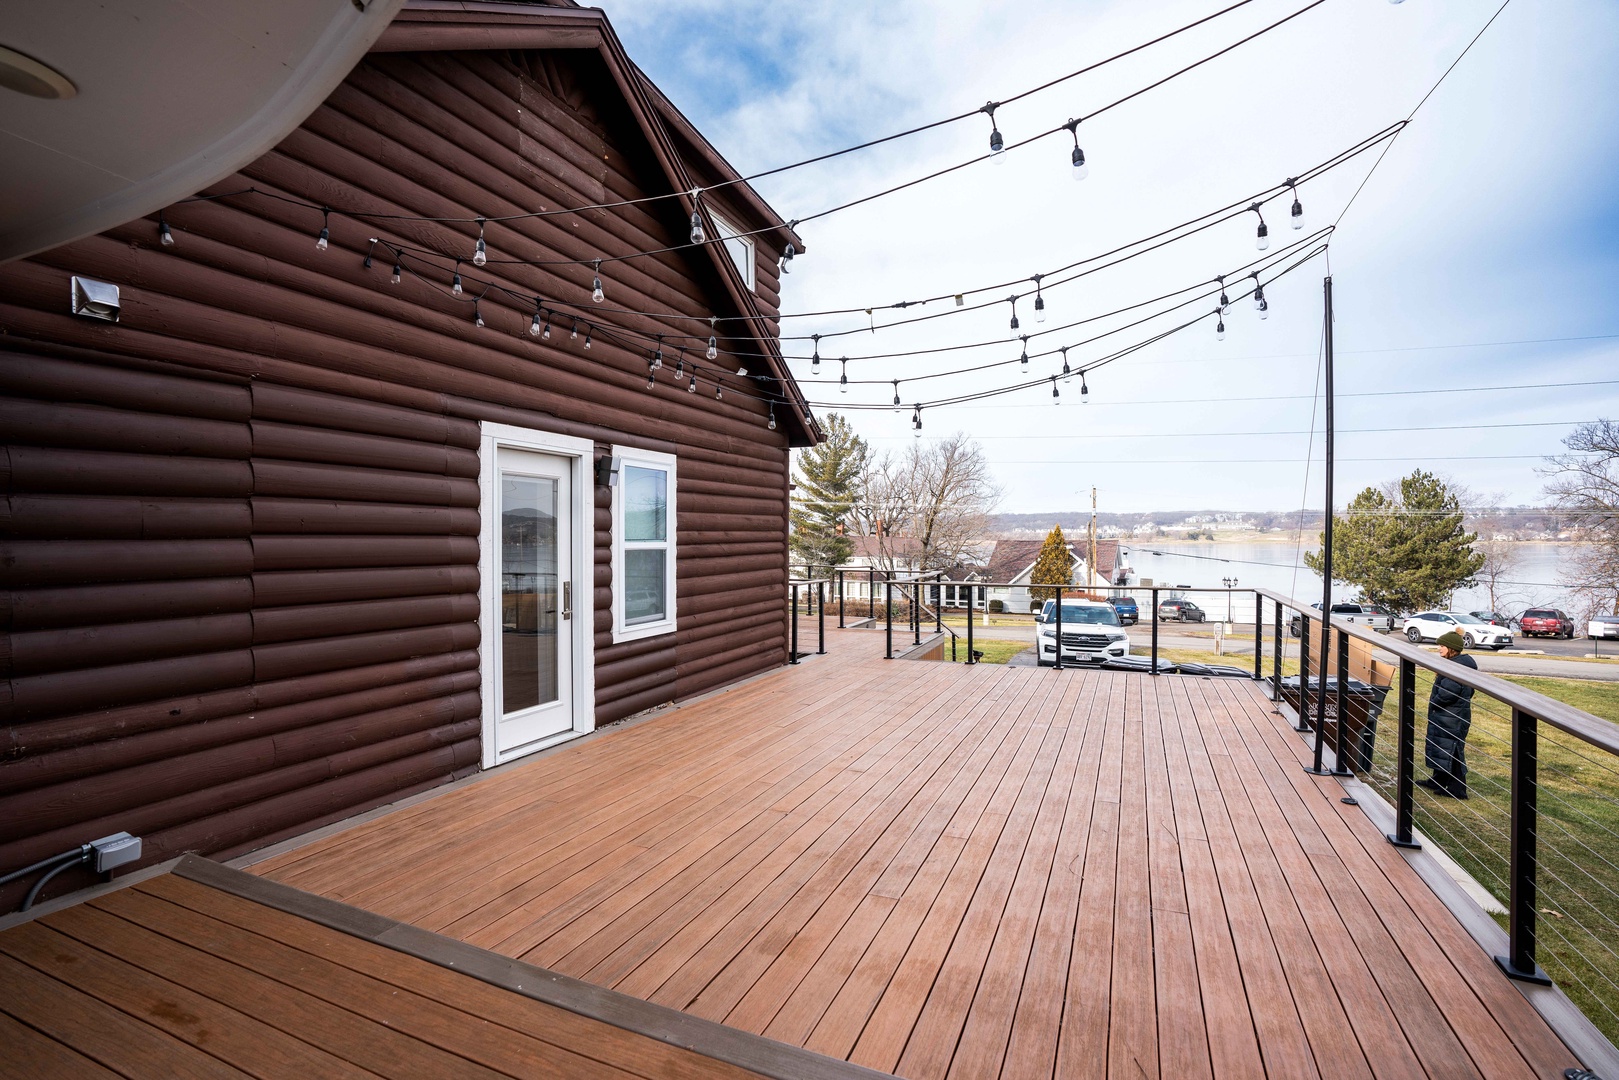 Take in the fresh air & gorgeous views on the large side deck